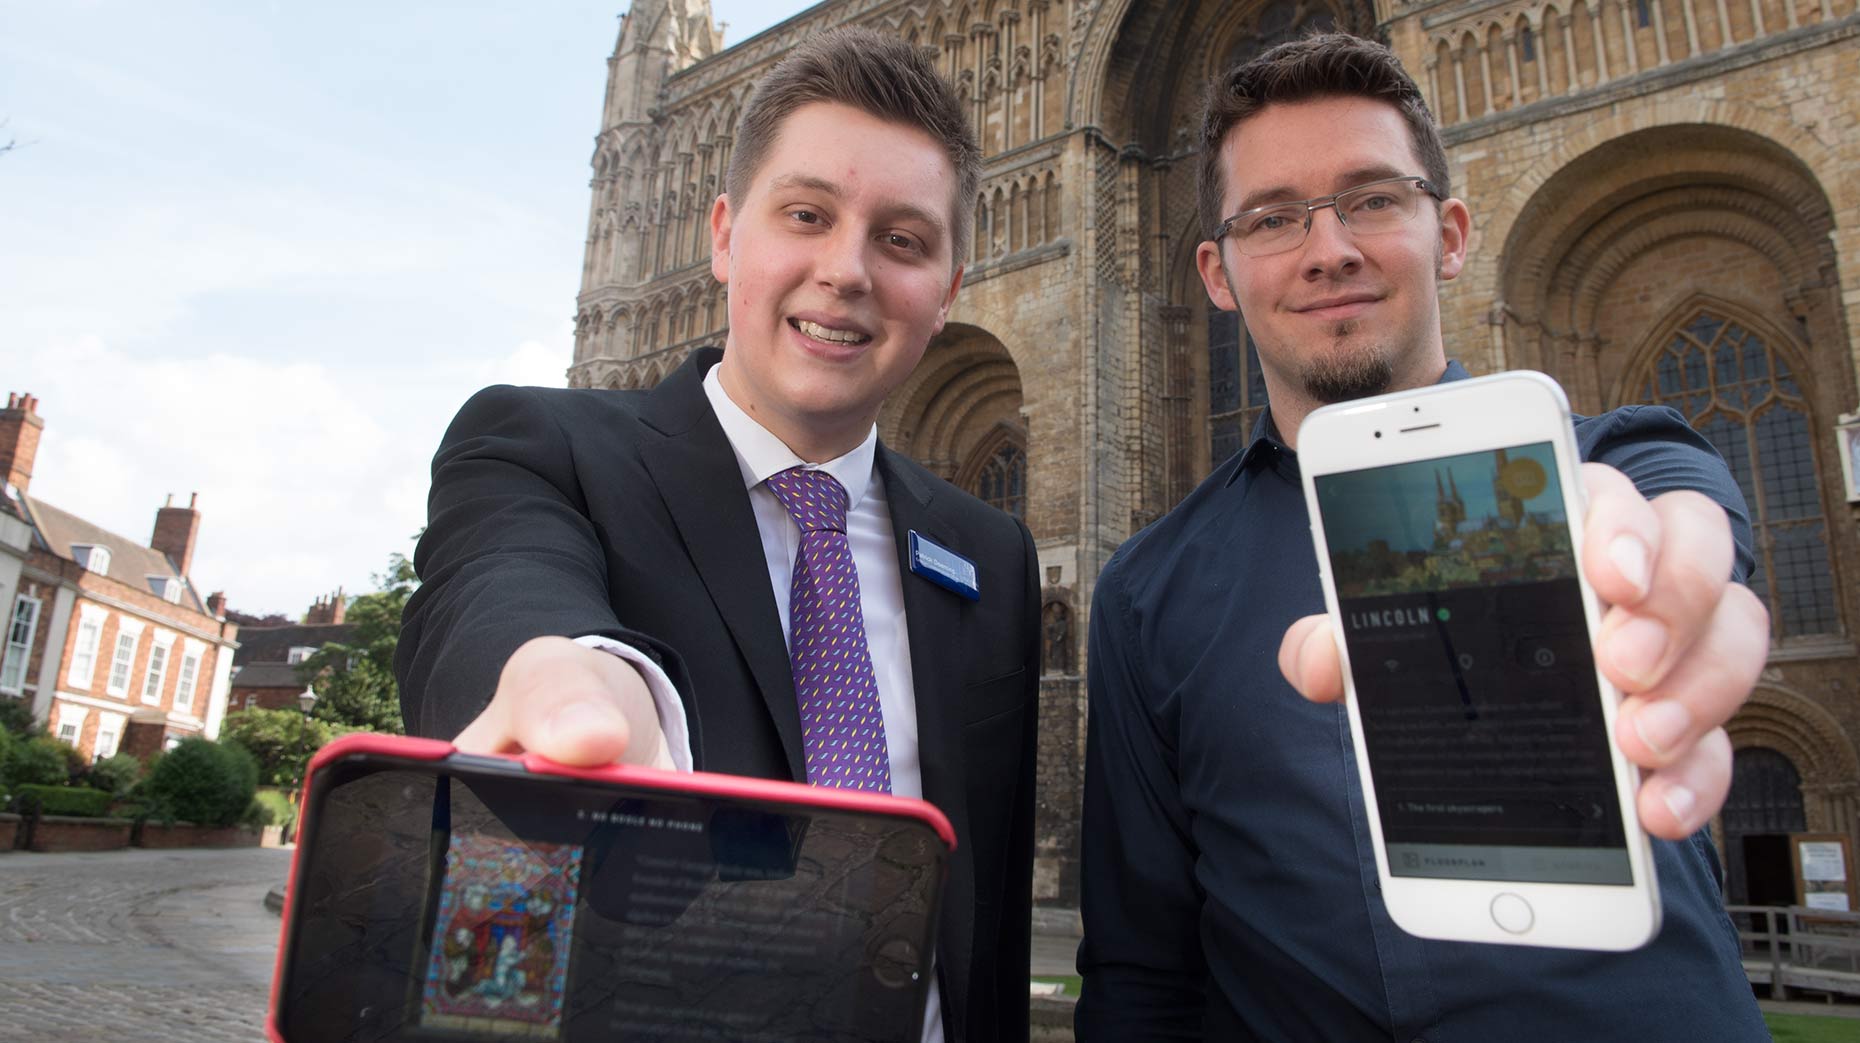 First look: New augmented reality app brings Lincoln Cathedral history to life - The Lincolnite